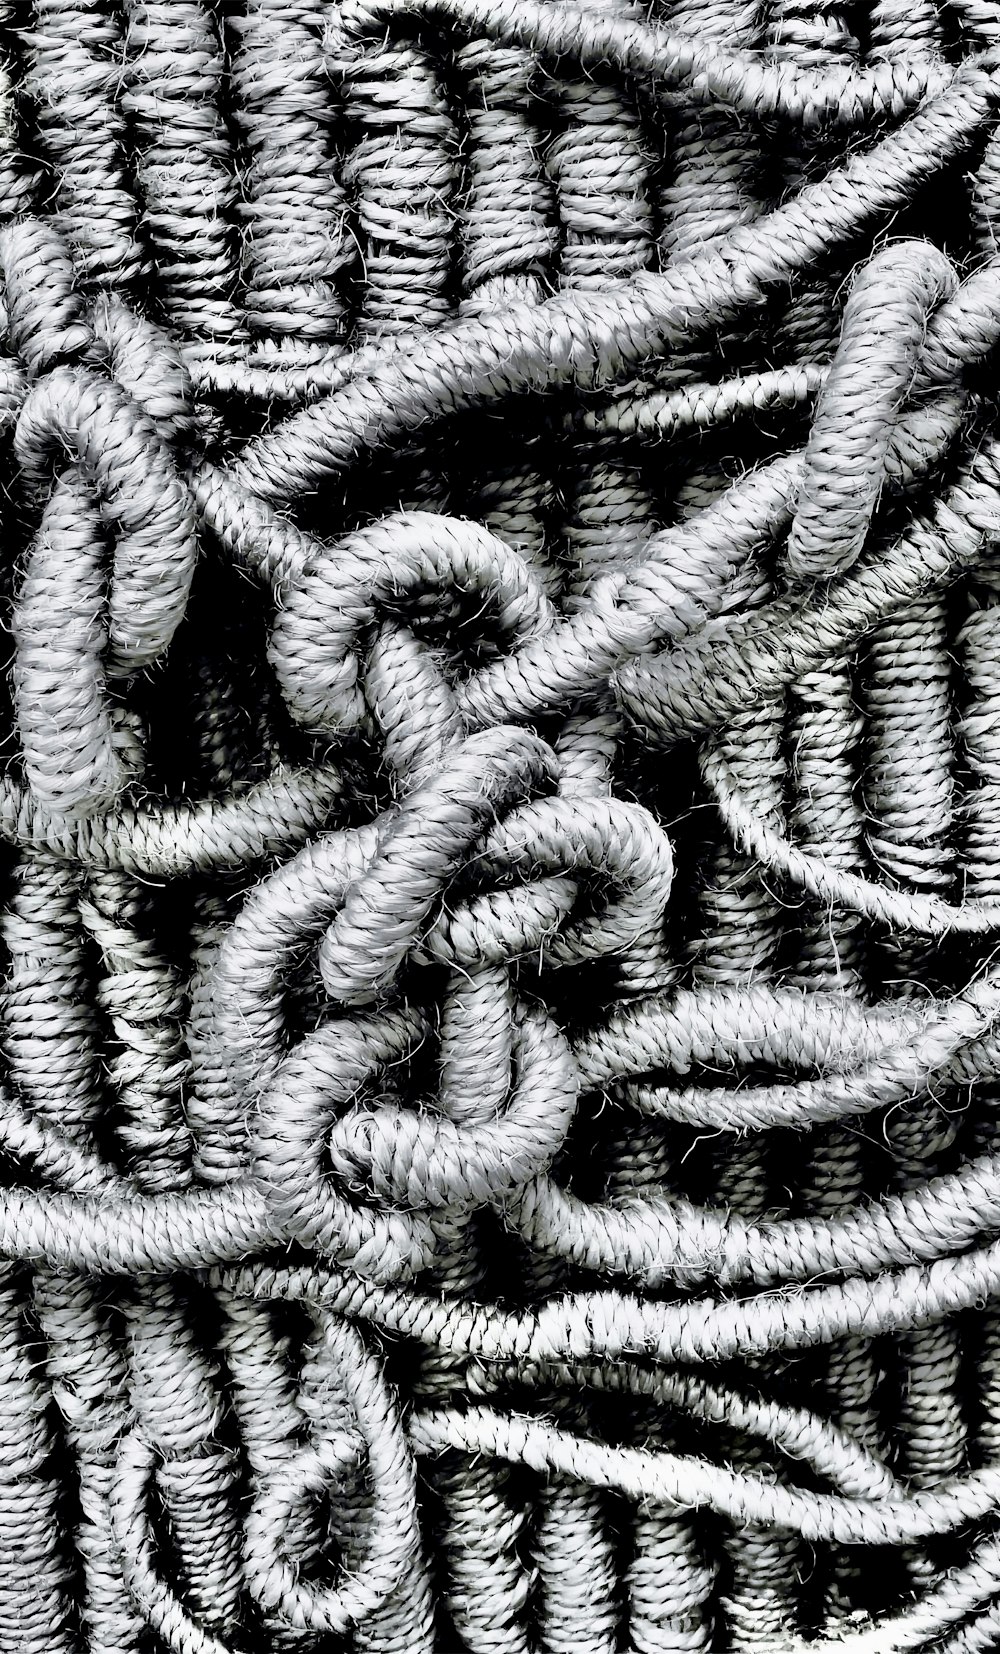 a close up of a rope with a knot on it